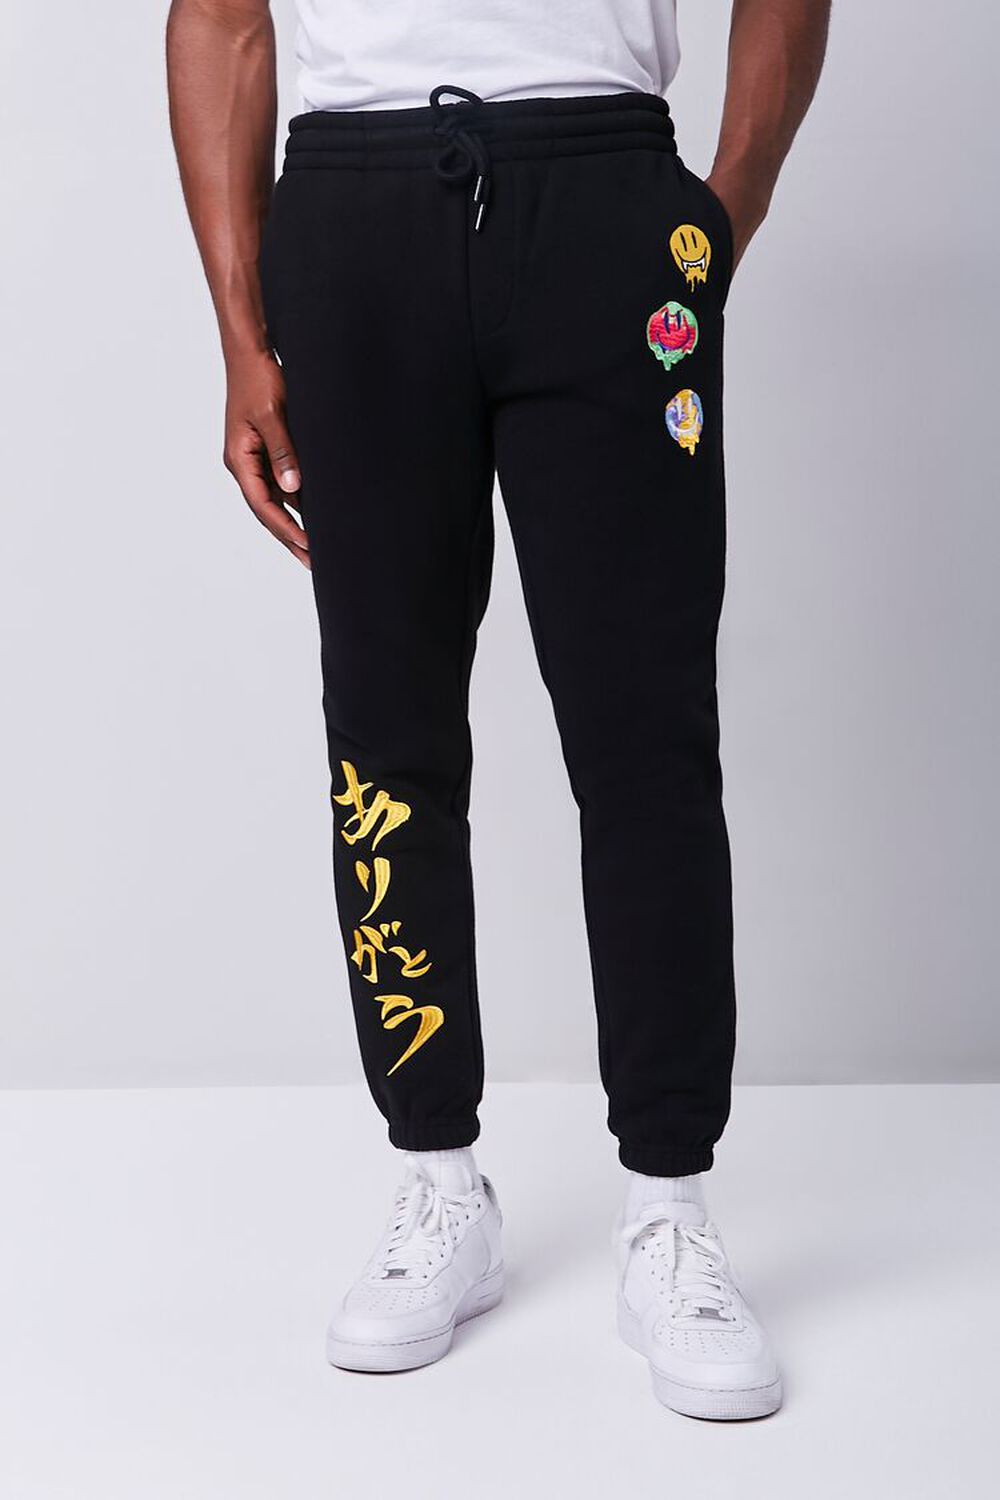 BLACK/MULTI Smiling Face Embroidered Graphic Joggers, image 1